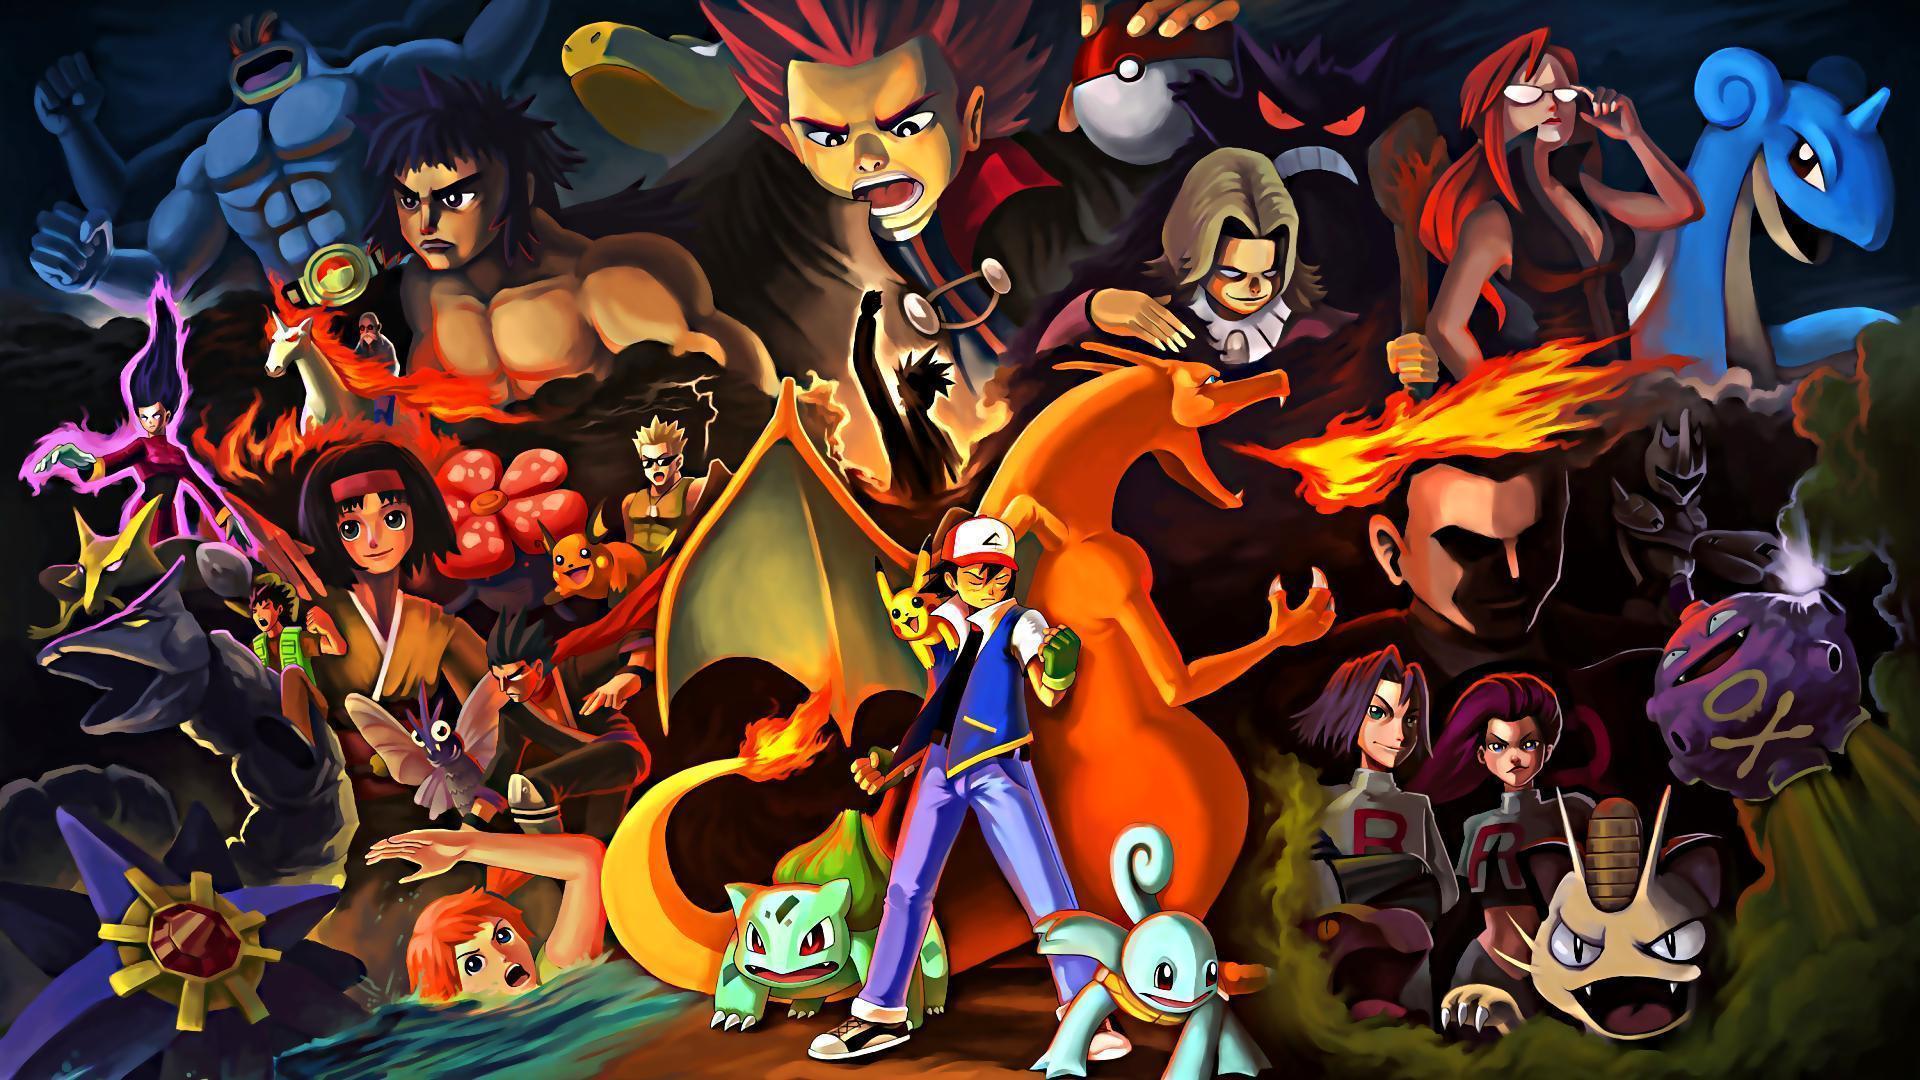 image For > Awesome Pokemon Wallpaper